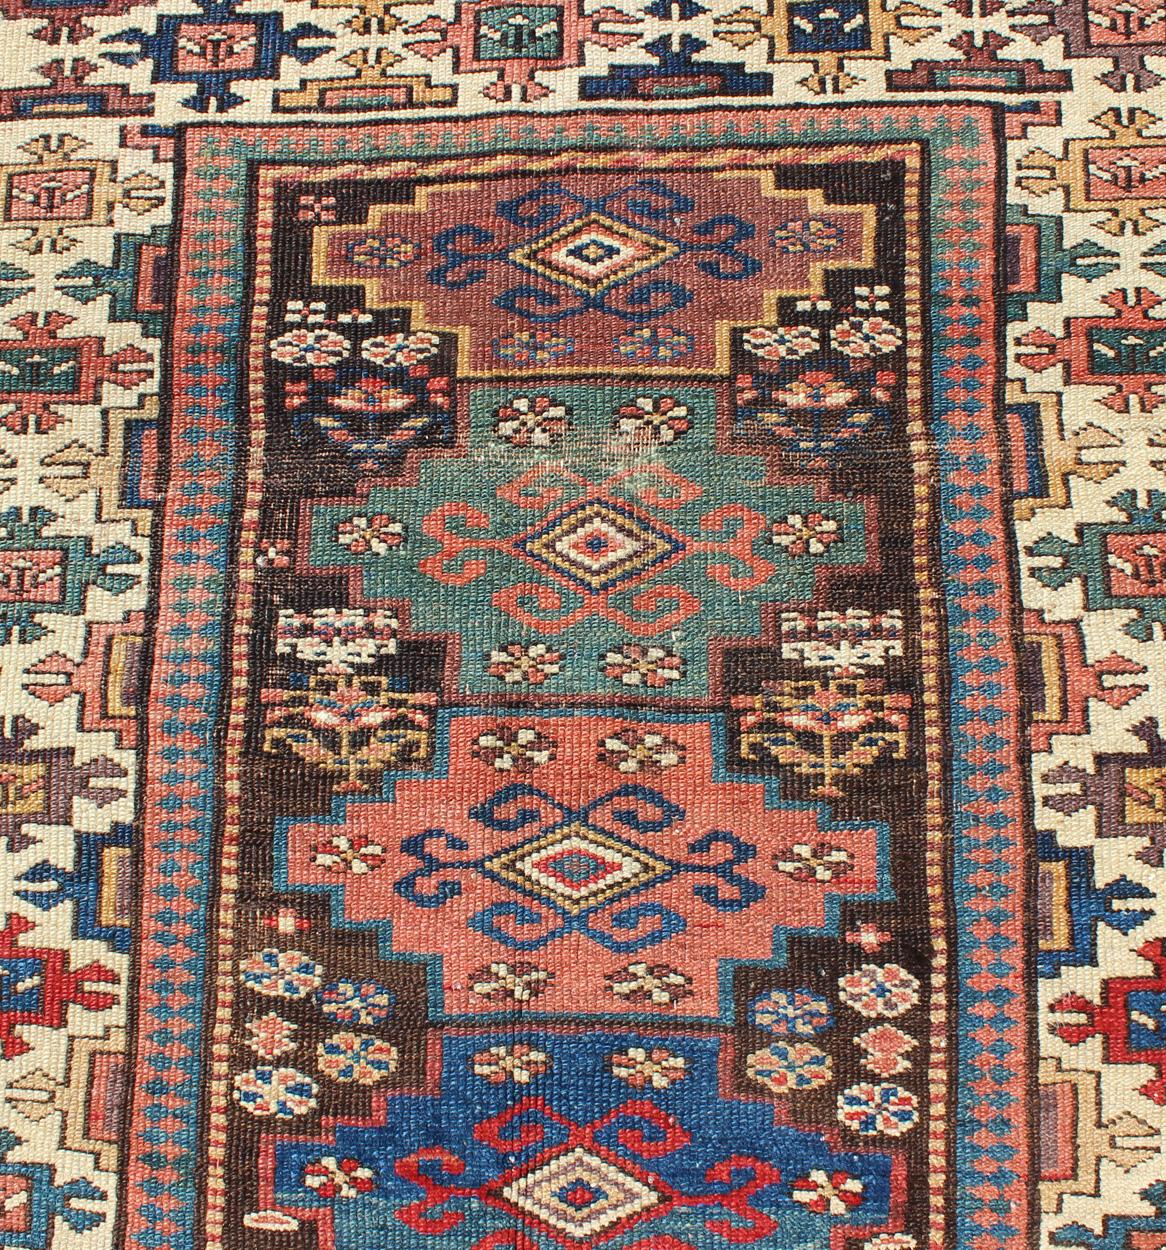 Early 20th Century Antique N.W. Persian Gallery Rug in Jewel Tones with Diamond Geometric Motifs For Sale